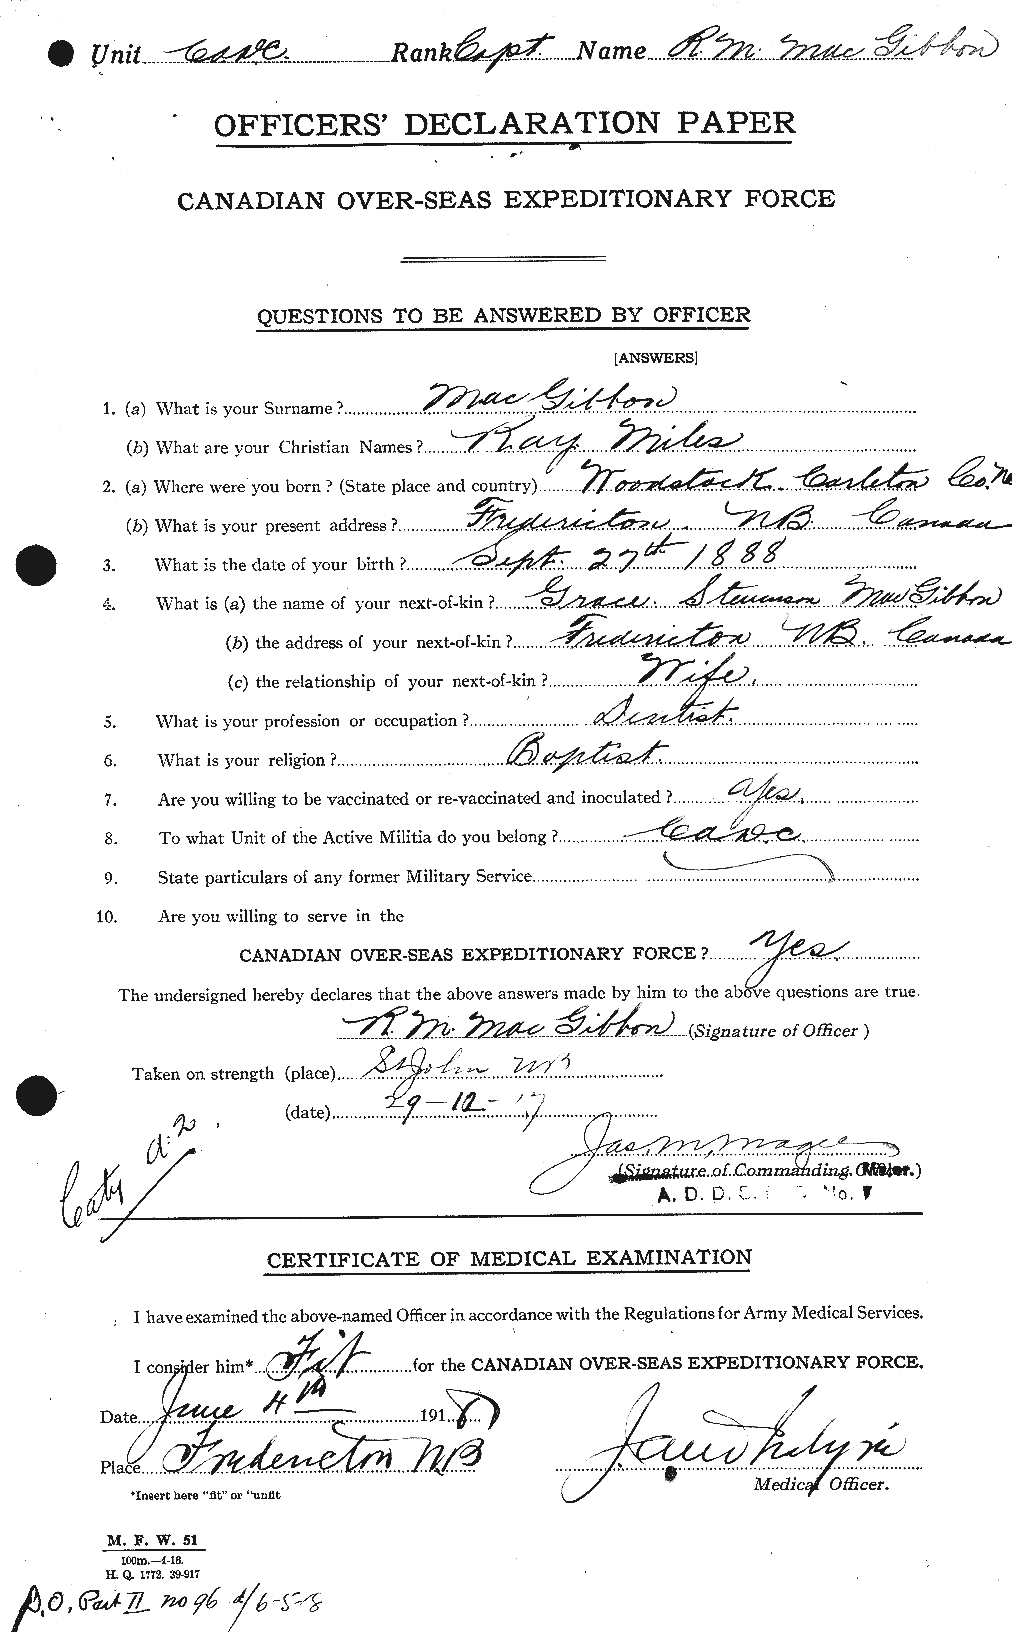 Personnel Records of the First World War - CEF 523410a